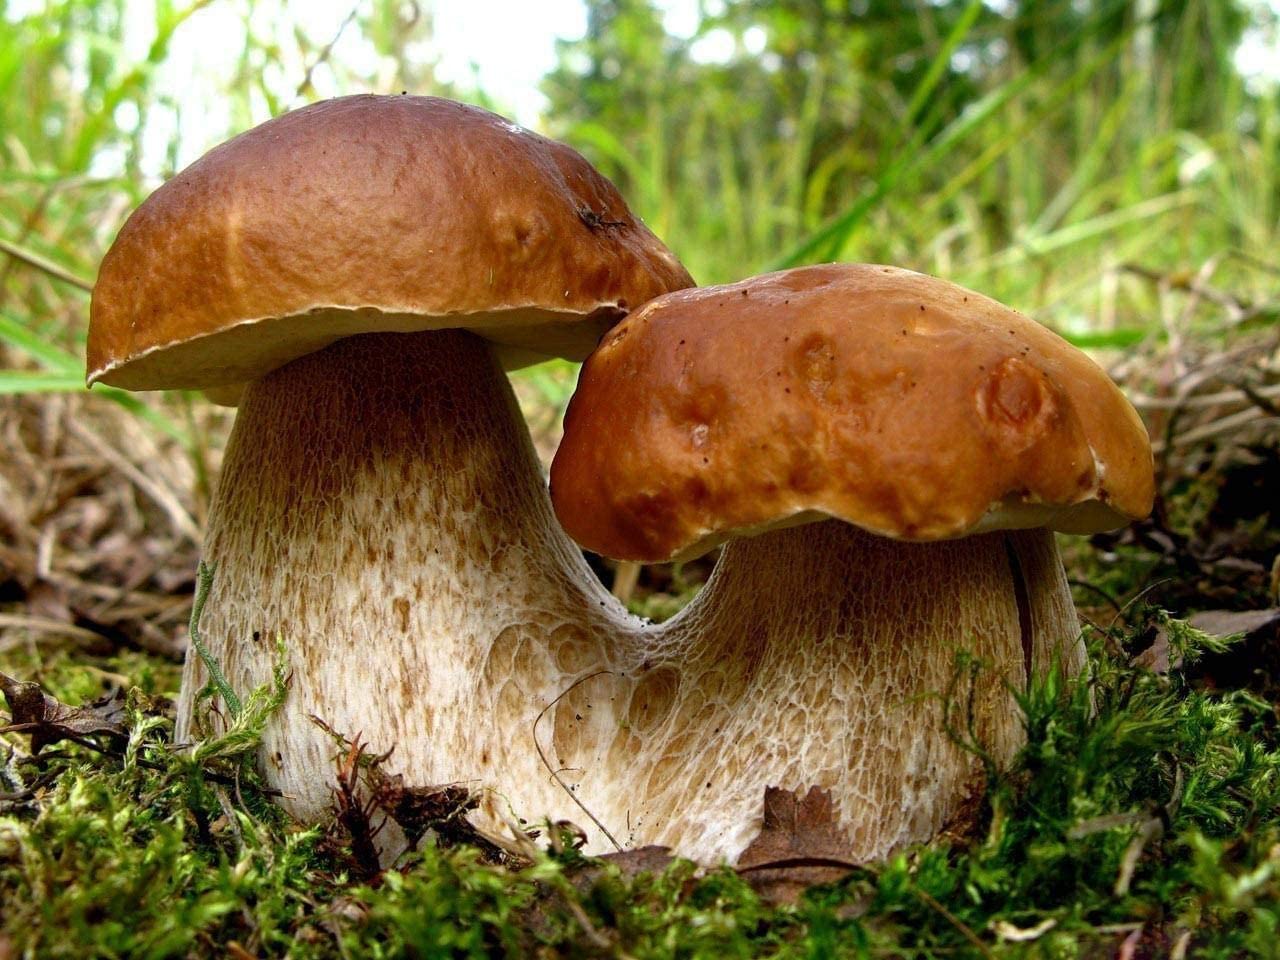 A mushroom is the fleshy, spore-bearing fruiting body of a fungus, typically produced above ground, on soil, or on its food source.